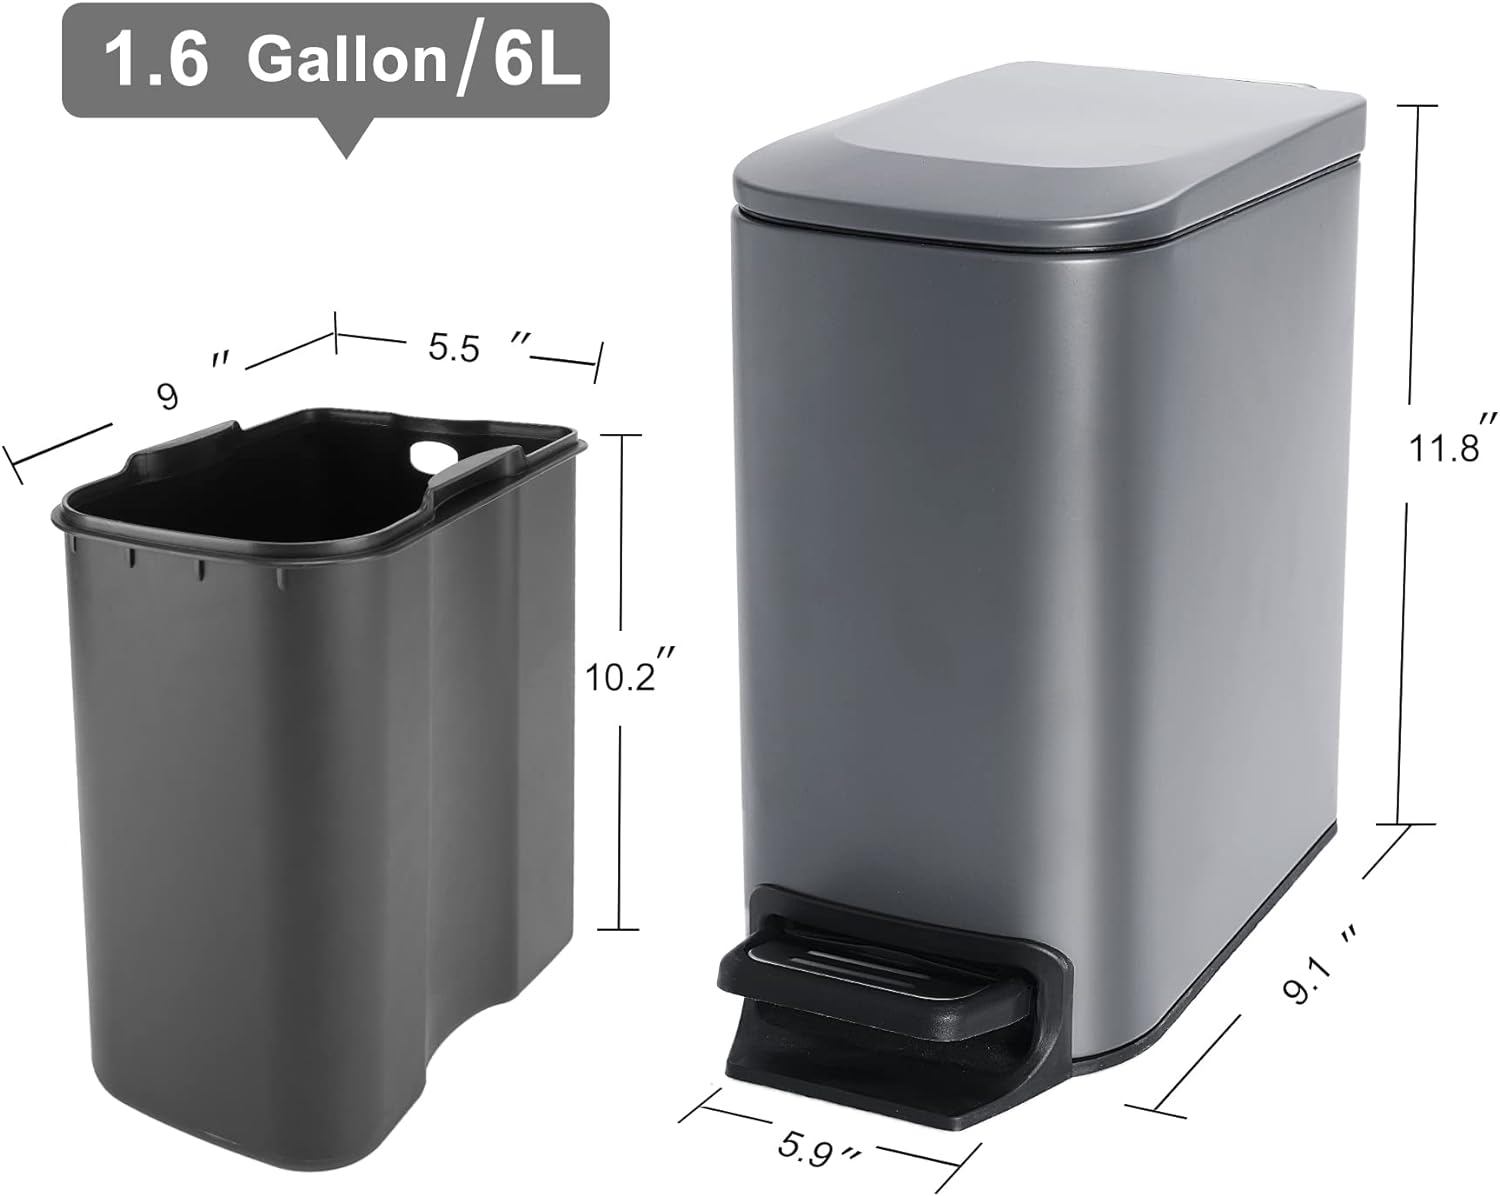 https://bigbigmart.com/wp-content/uploads/2023/10/Cesun-Small-Bathroom-Trash-Can-with-Lid-Soft-Close-Step-Pedal-6-Liter-1.6-Gallon-Stainless-Steel-Garbage-Can-with-Removable-Inner-Bucket-Anti-Fingerprint-Finish-Gray5.jpg